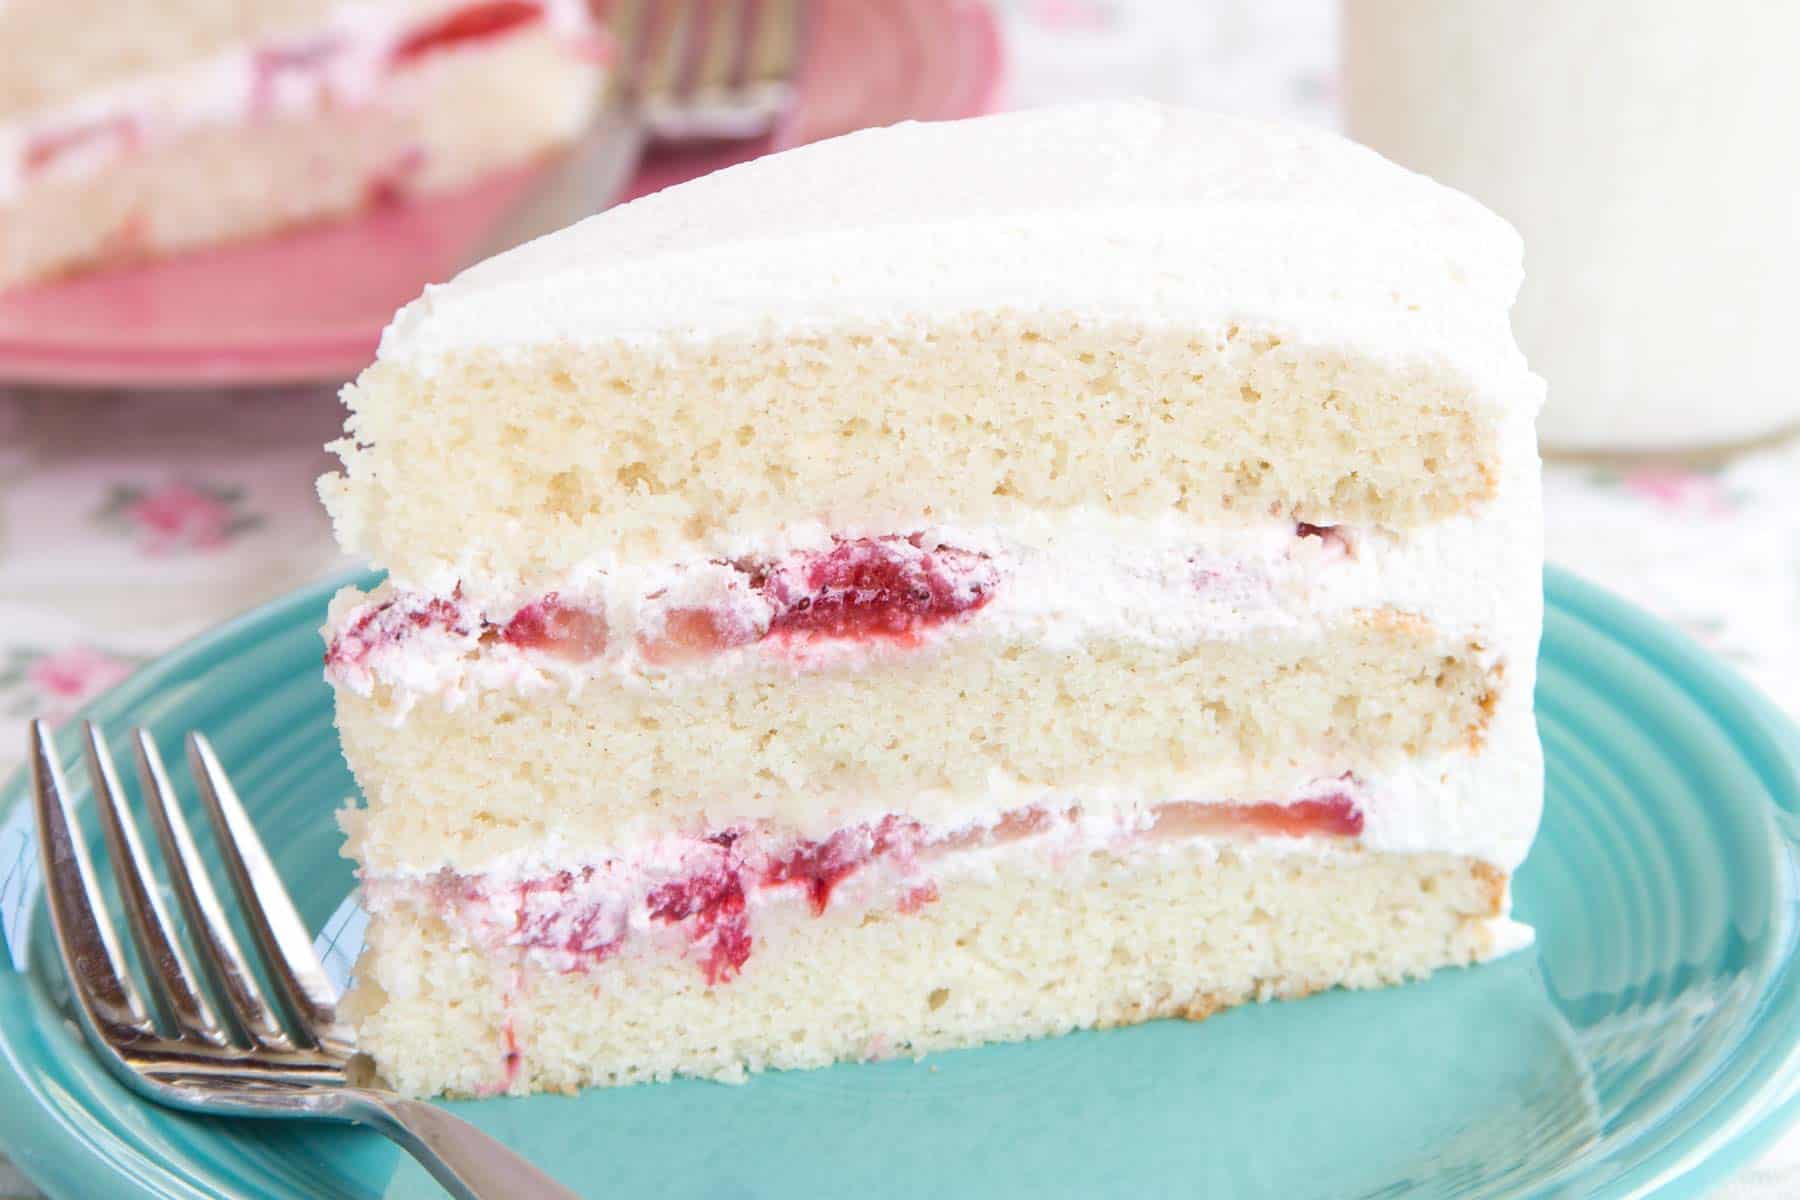 Gluten Free Strawberry and Cream Cake sliced on a plate